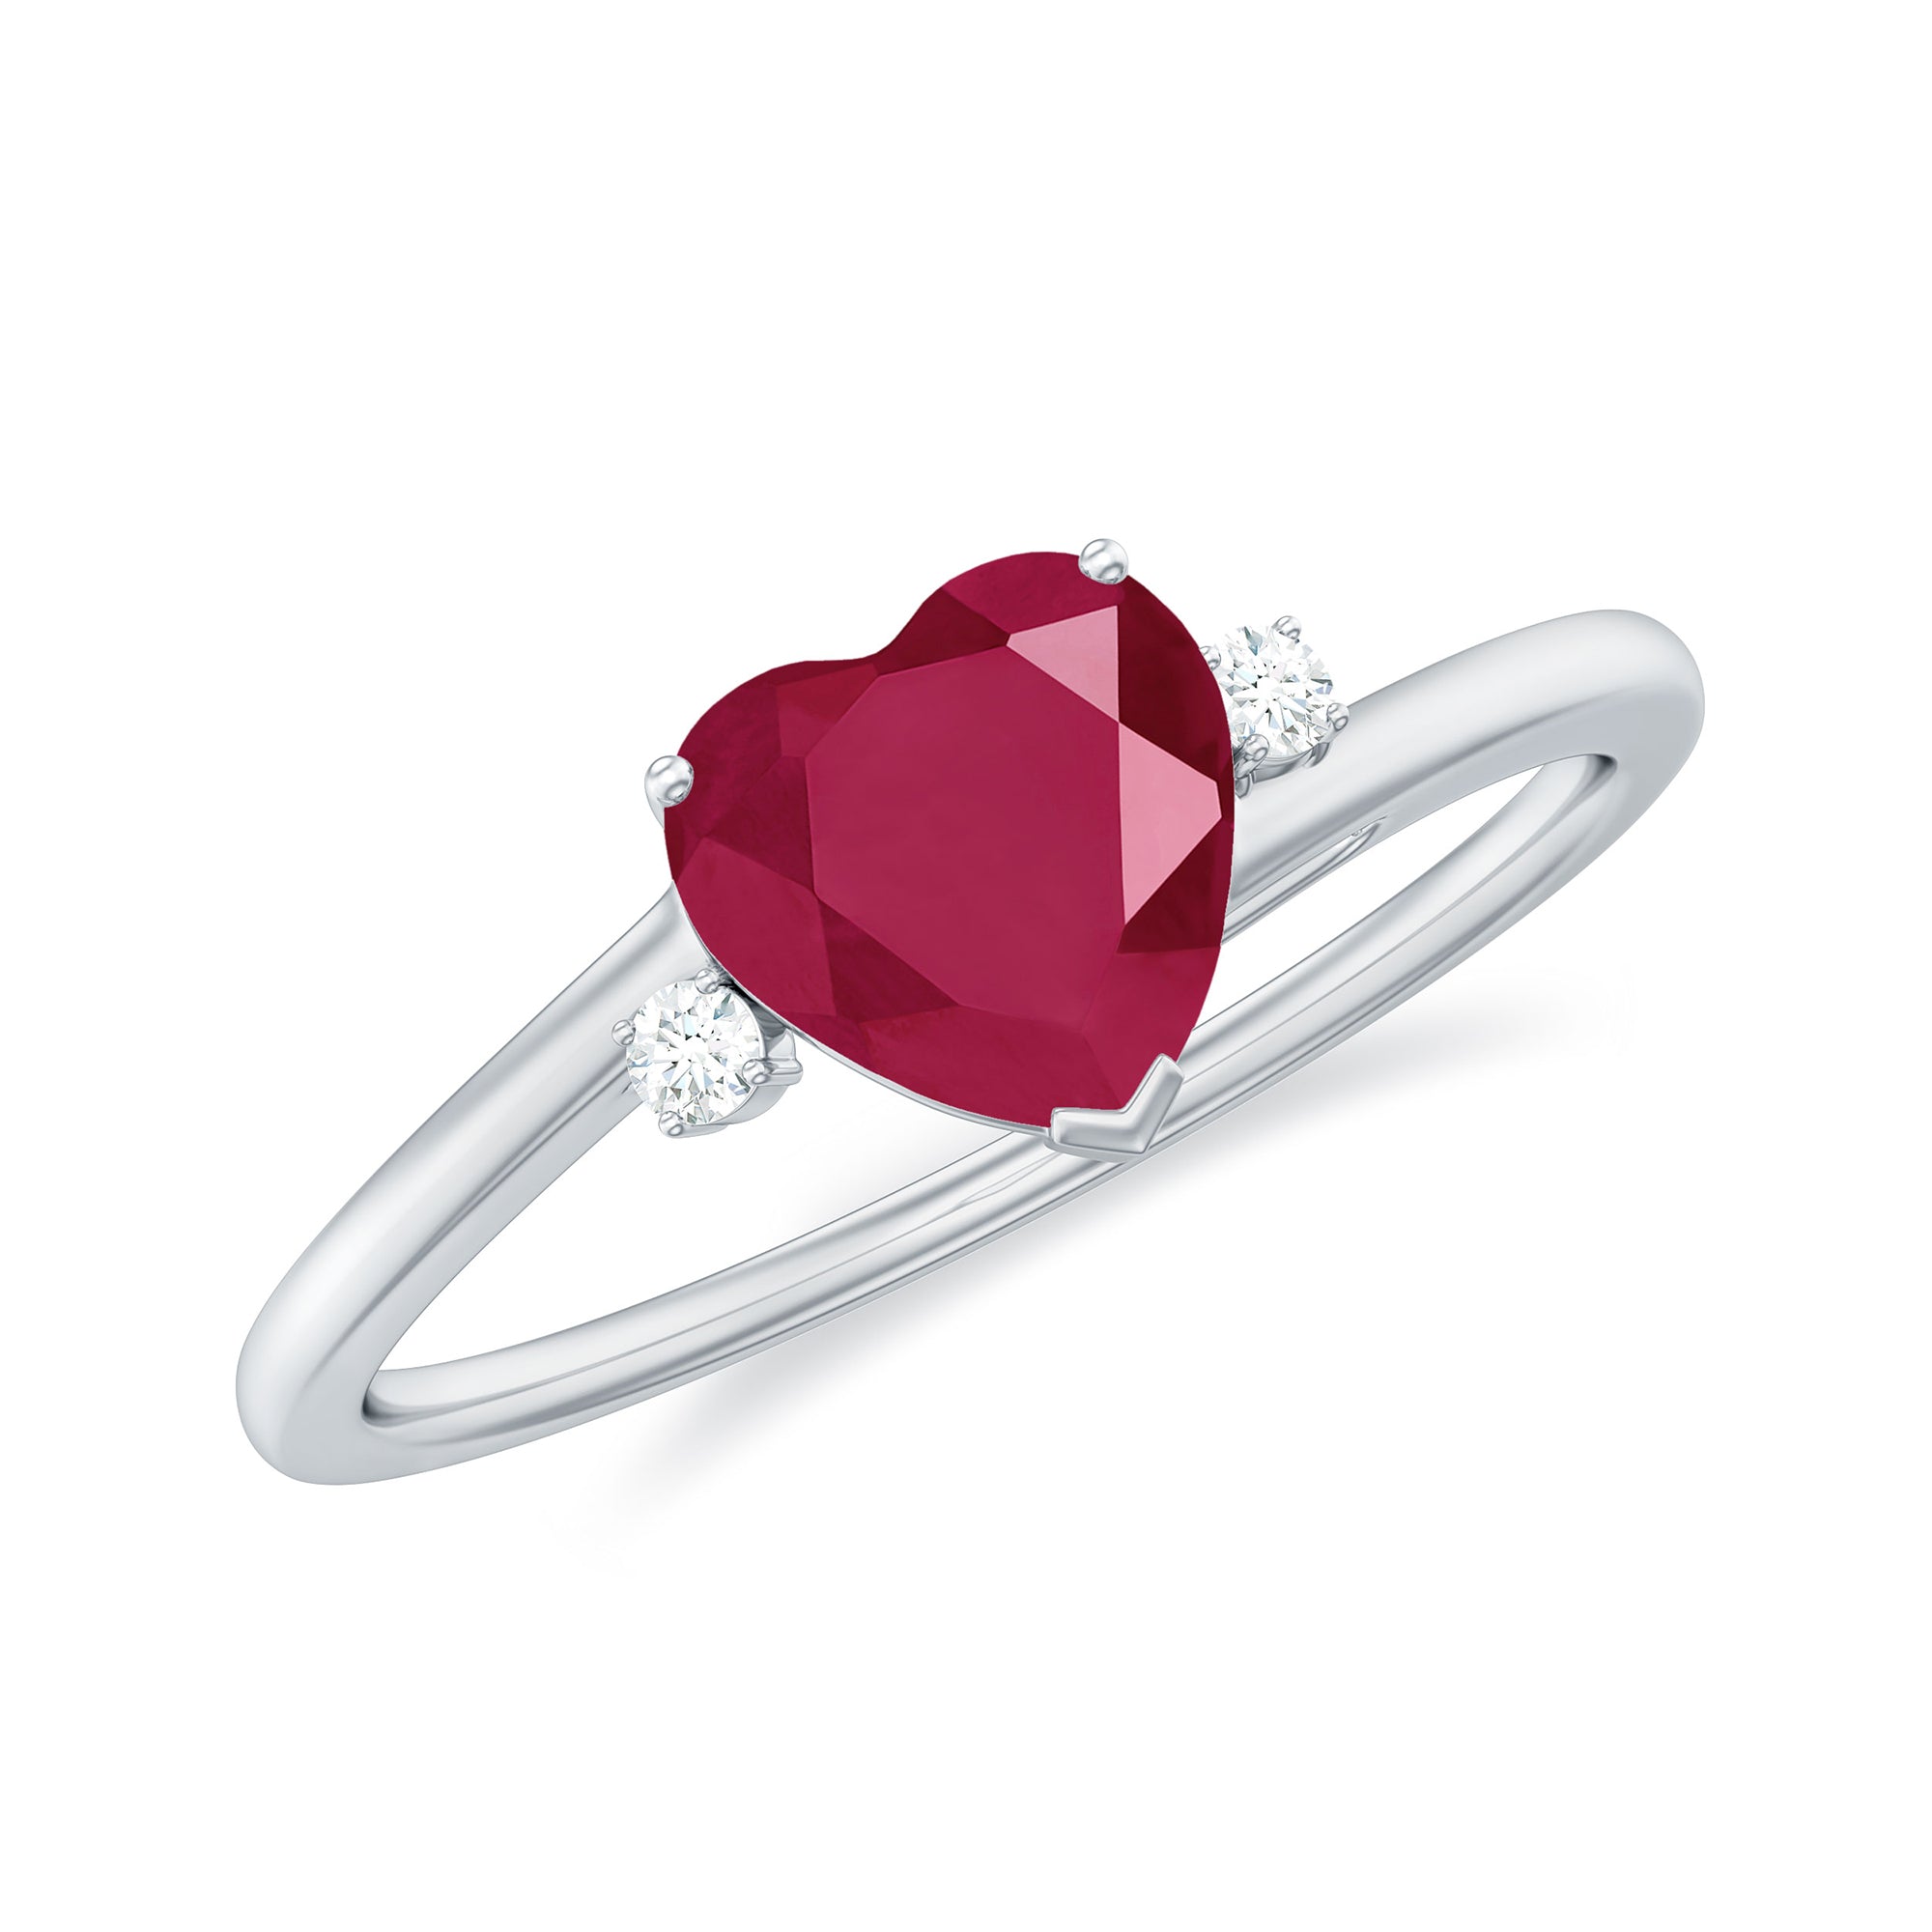 Natural Ruby Heart Solitaire Promise Ring with Diamond Ruby - ( AAA ) - Quality - Rosec Jewels